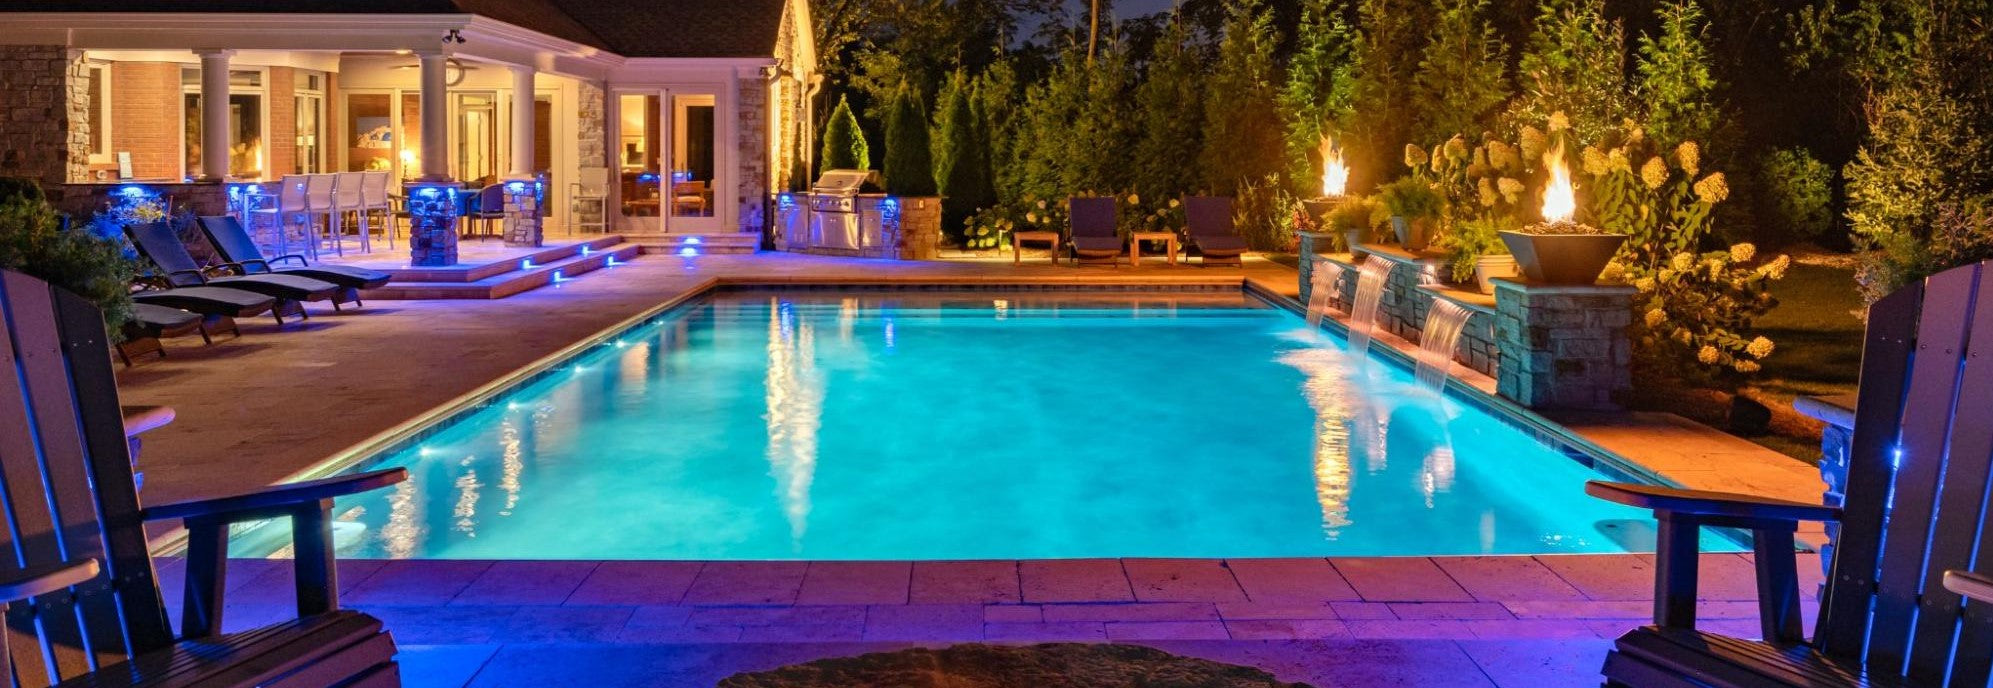 pool and outdoor landscape lighting with color